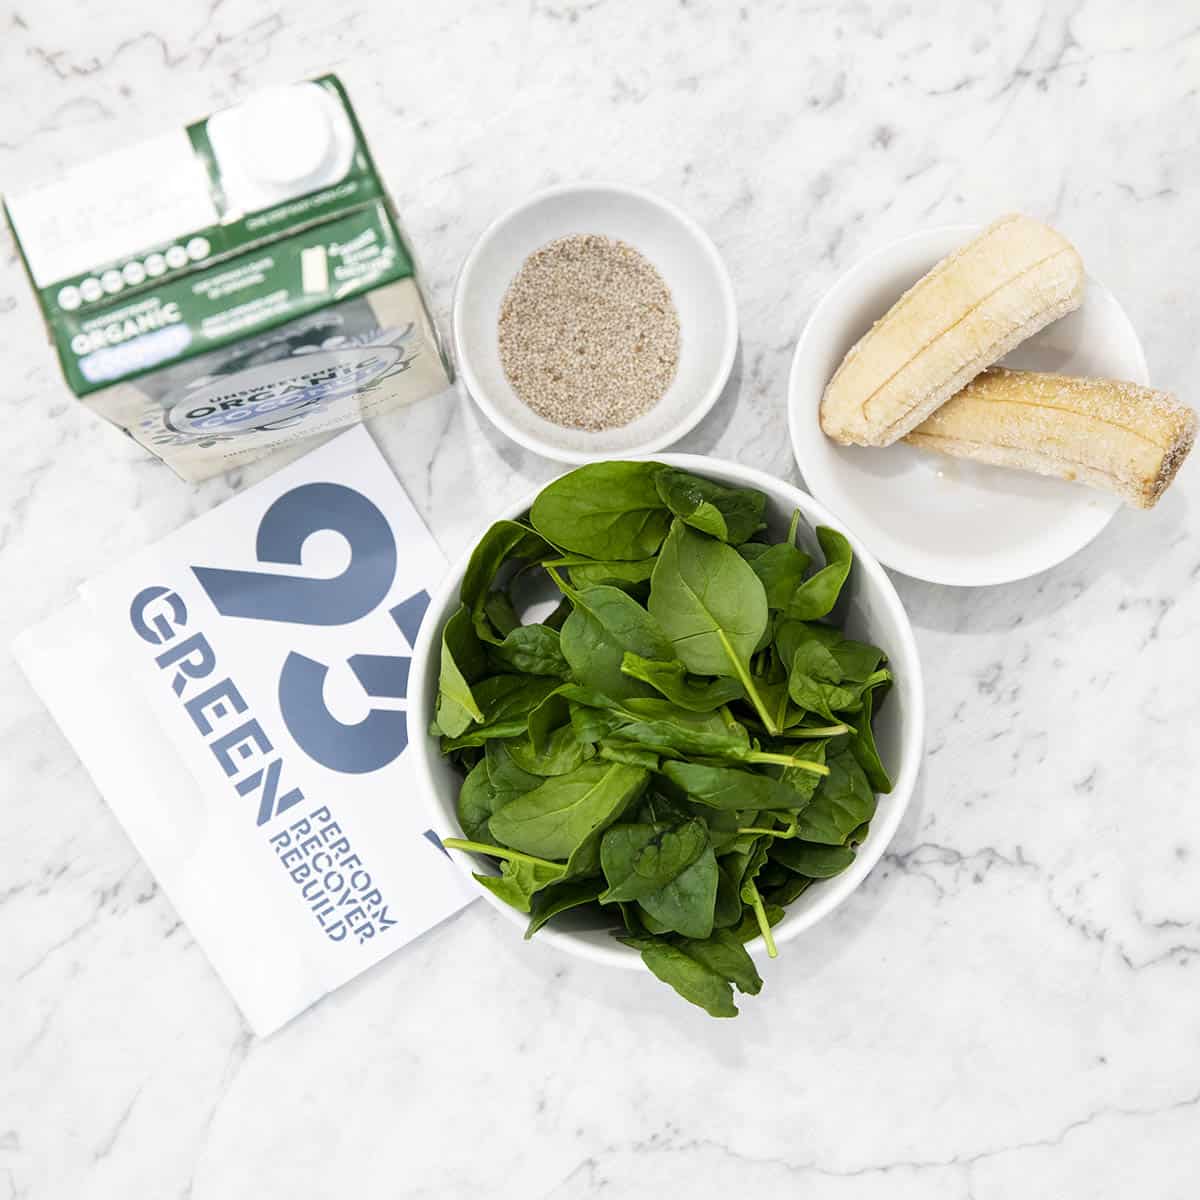 Ingredients for the green protein smoothie on a marble background